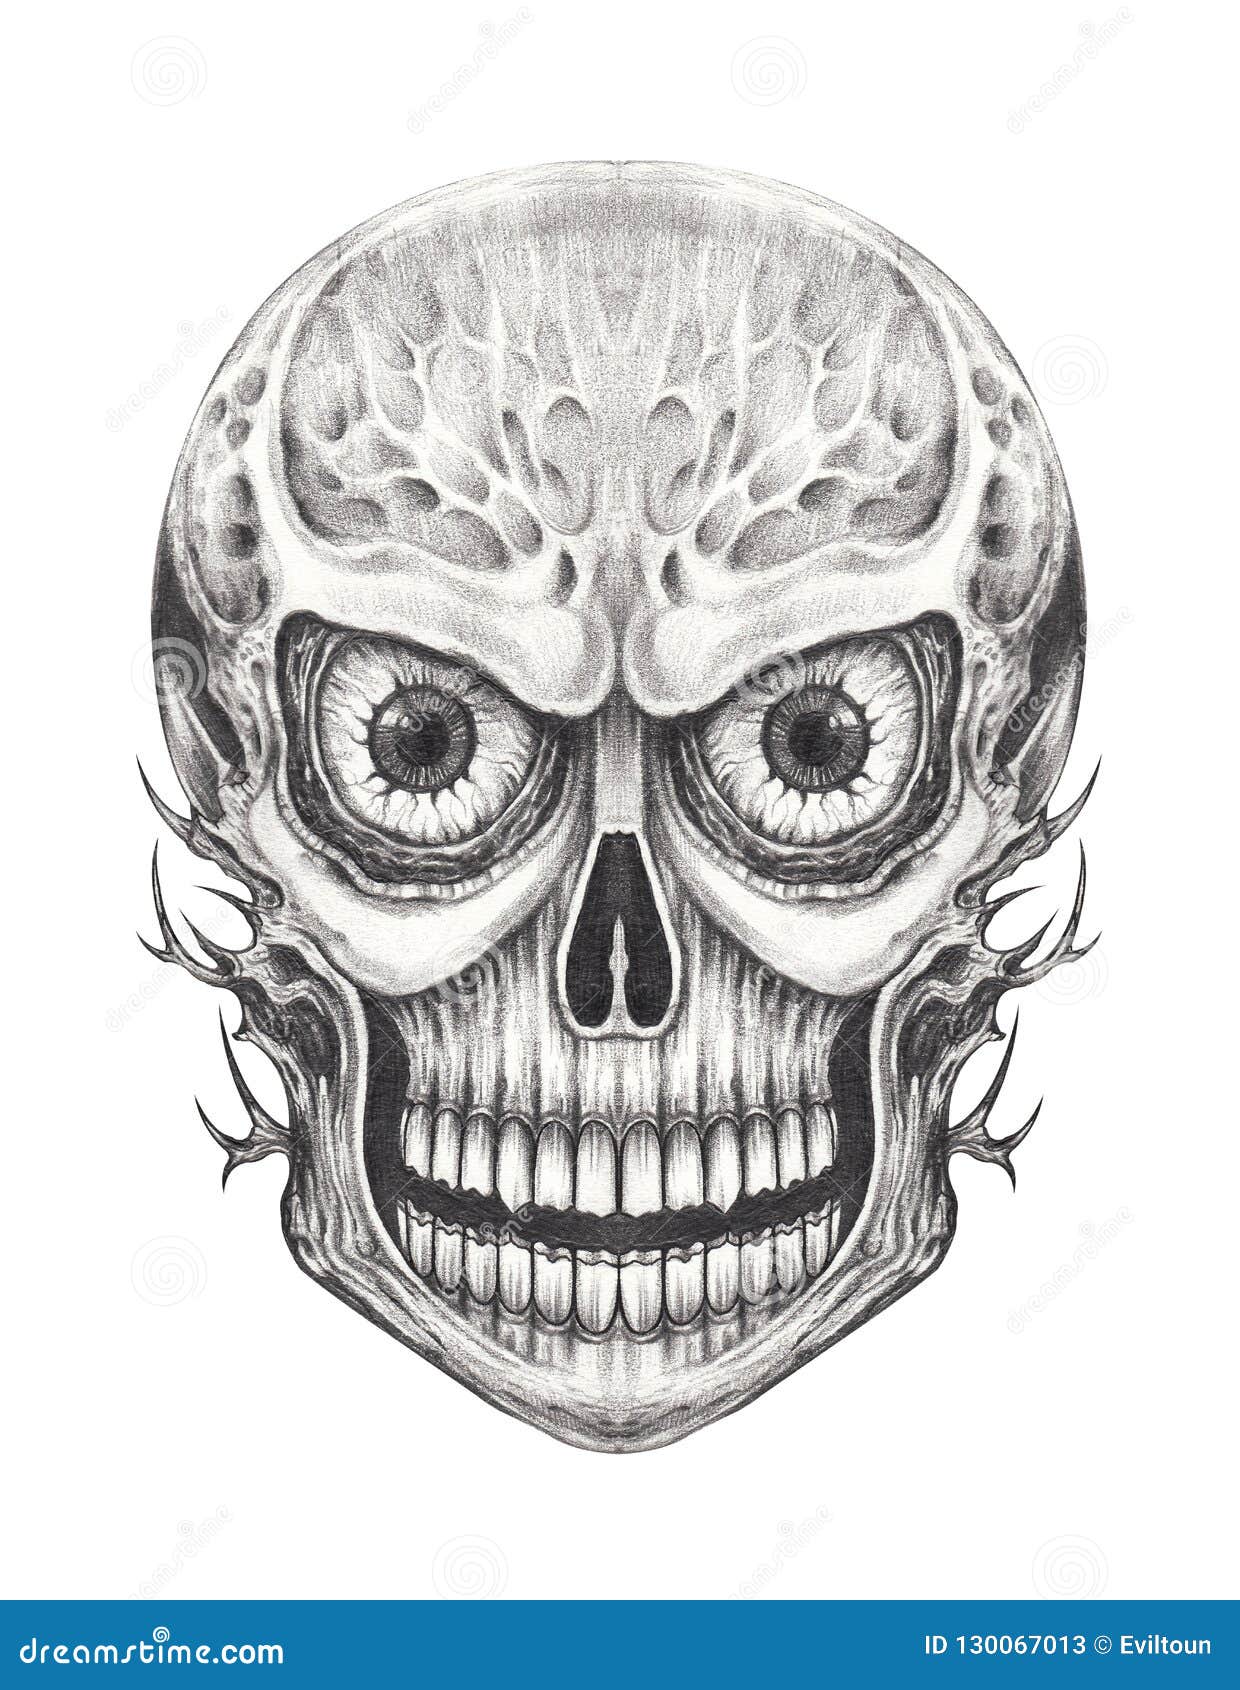 The Skull King Tattoo And Academy in College RoadNashik  Best Tattoo  Artists in Nashik  Justdial